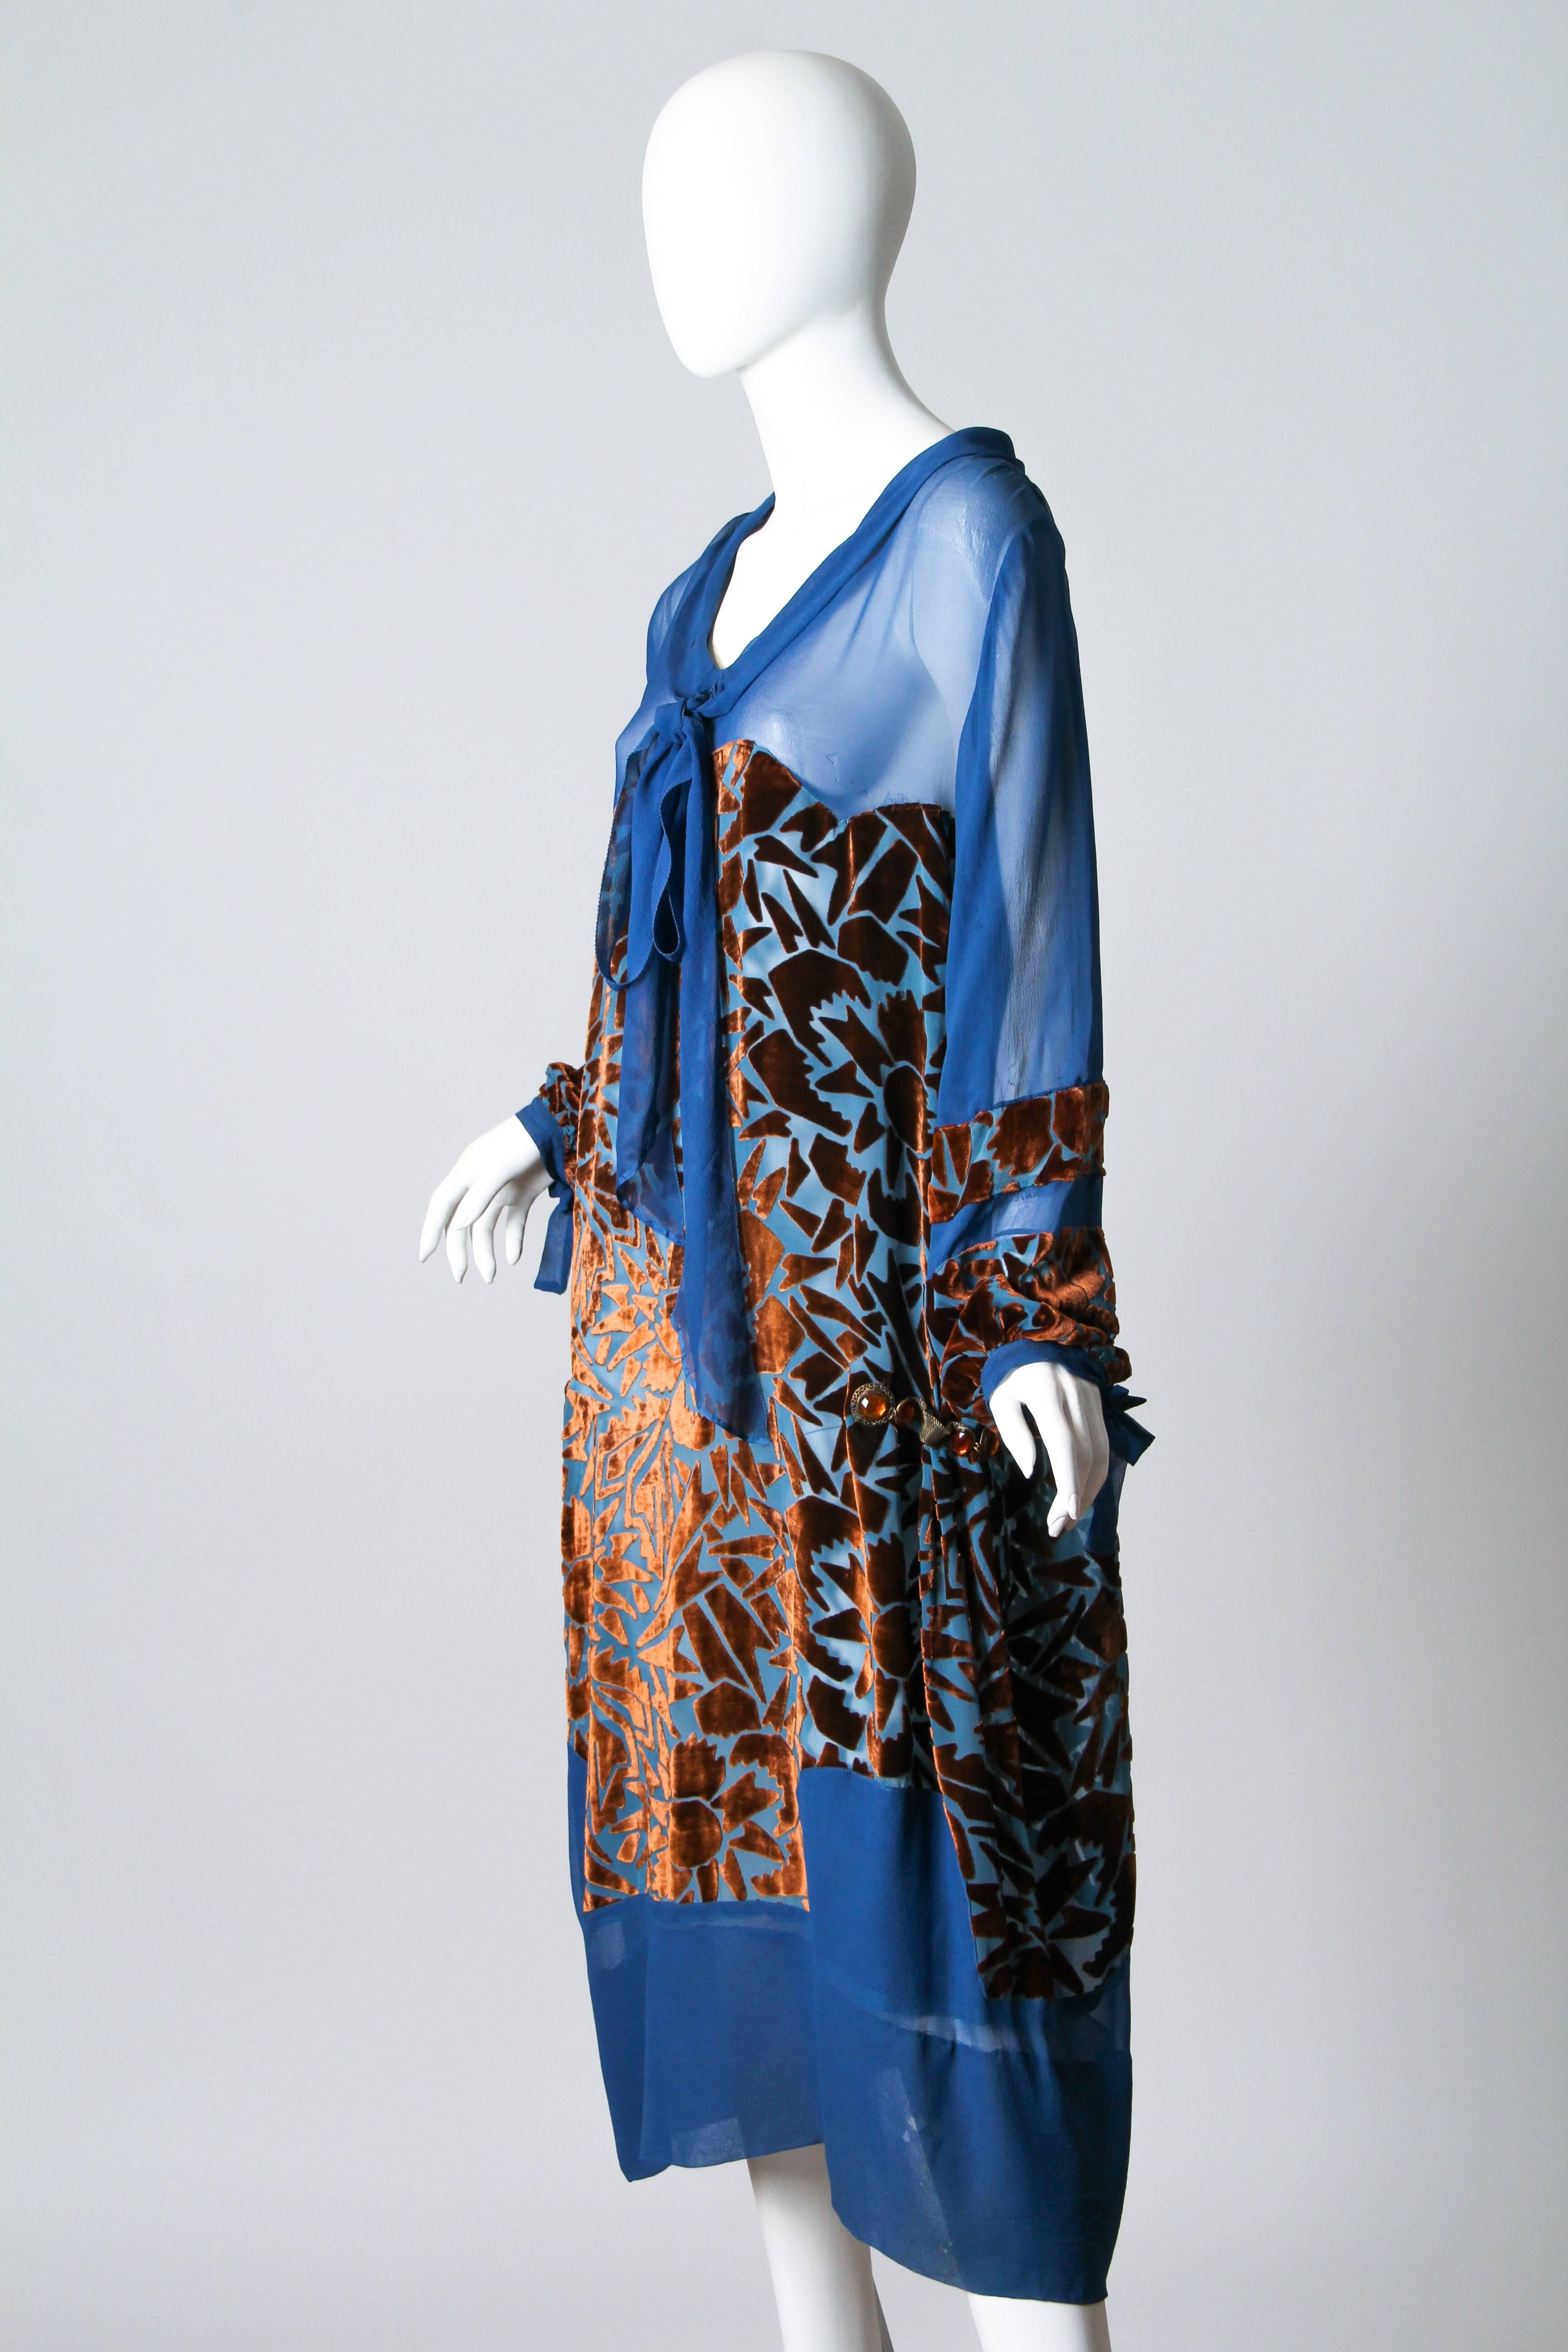 This is a lovely blue silk afternoon dress from the mid-1920s. The sheer base fabric is embellished from the bust to the knees and around the lower arms with beautiful chestnut-brown voided velvet. The velvet is cut in an abstract geometric pattern